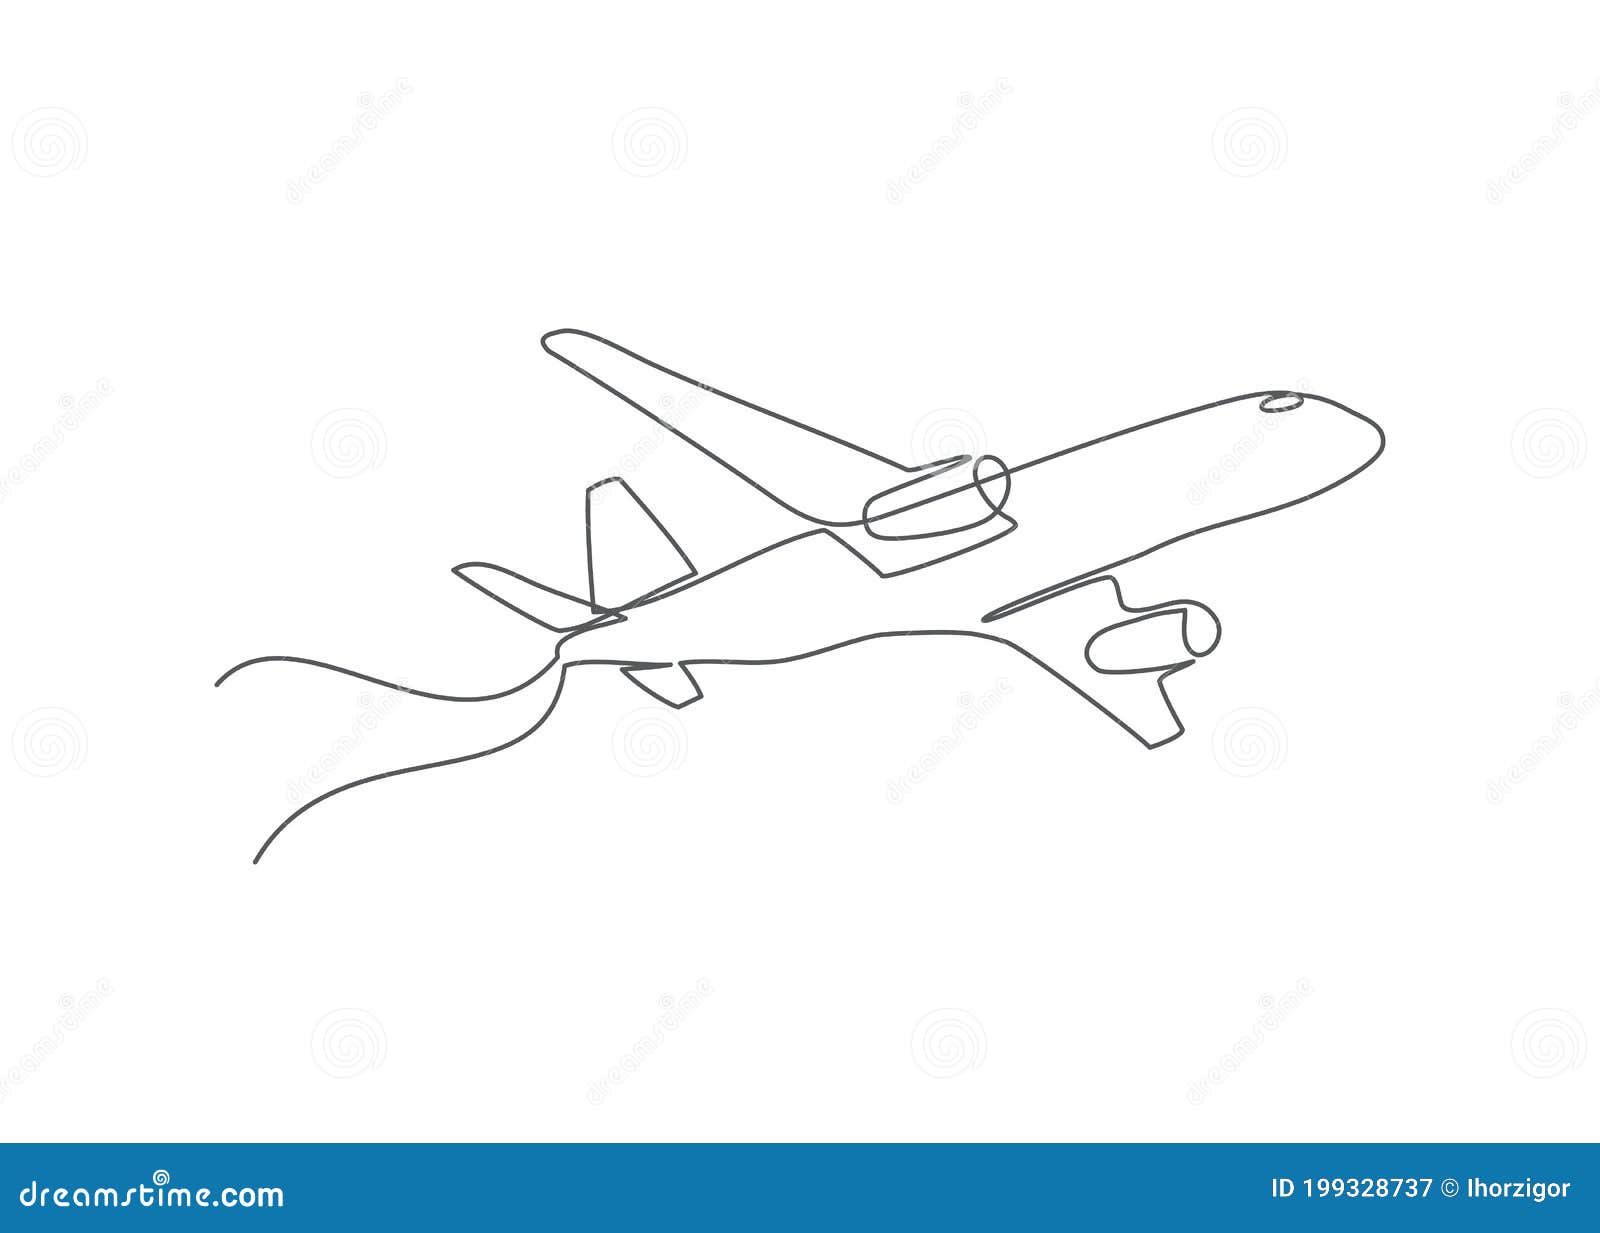 Airplane One Line Drawing Vector Airplane in Line Style on White ...